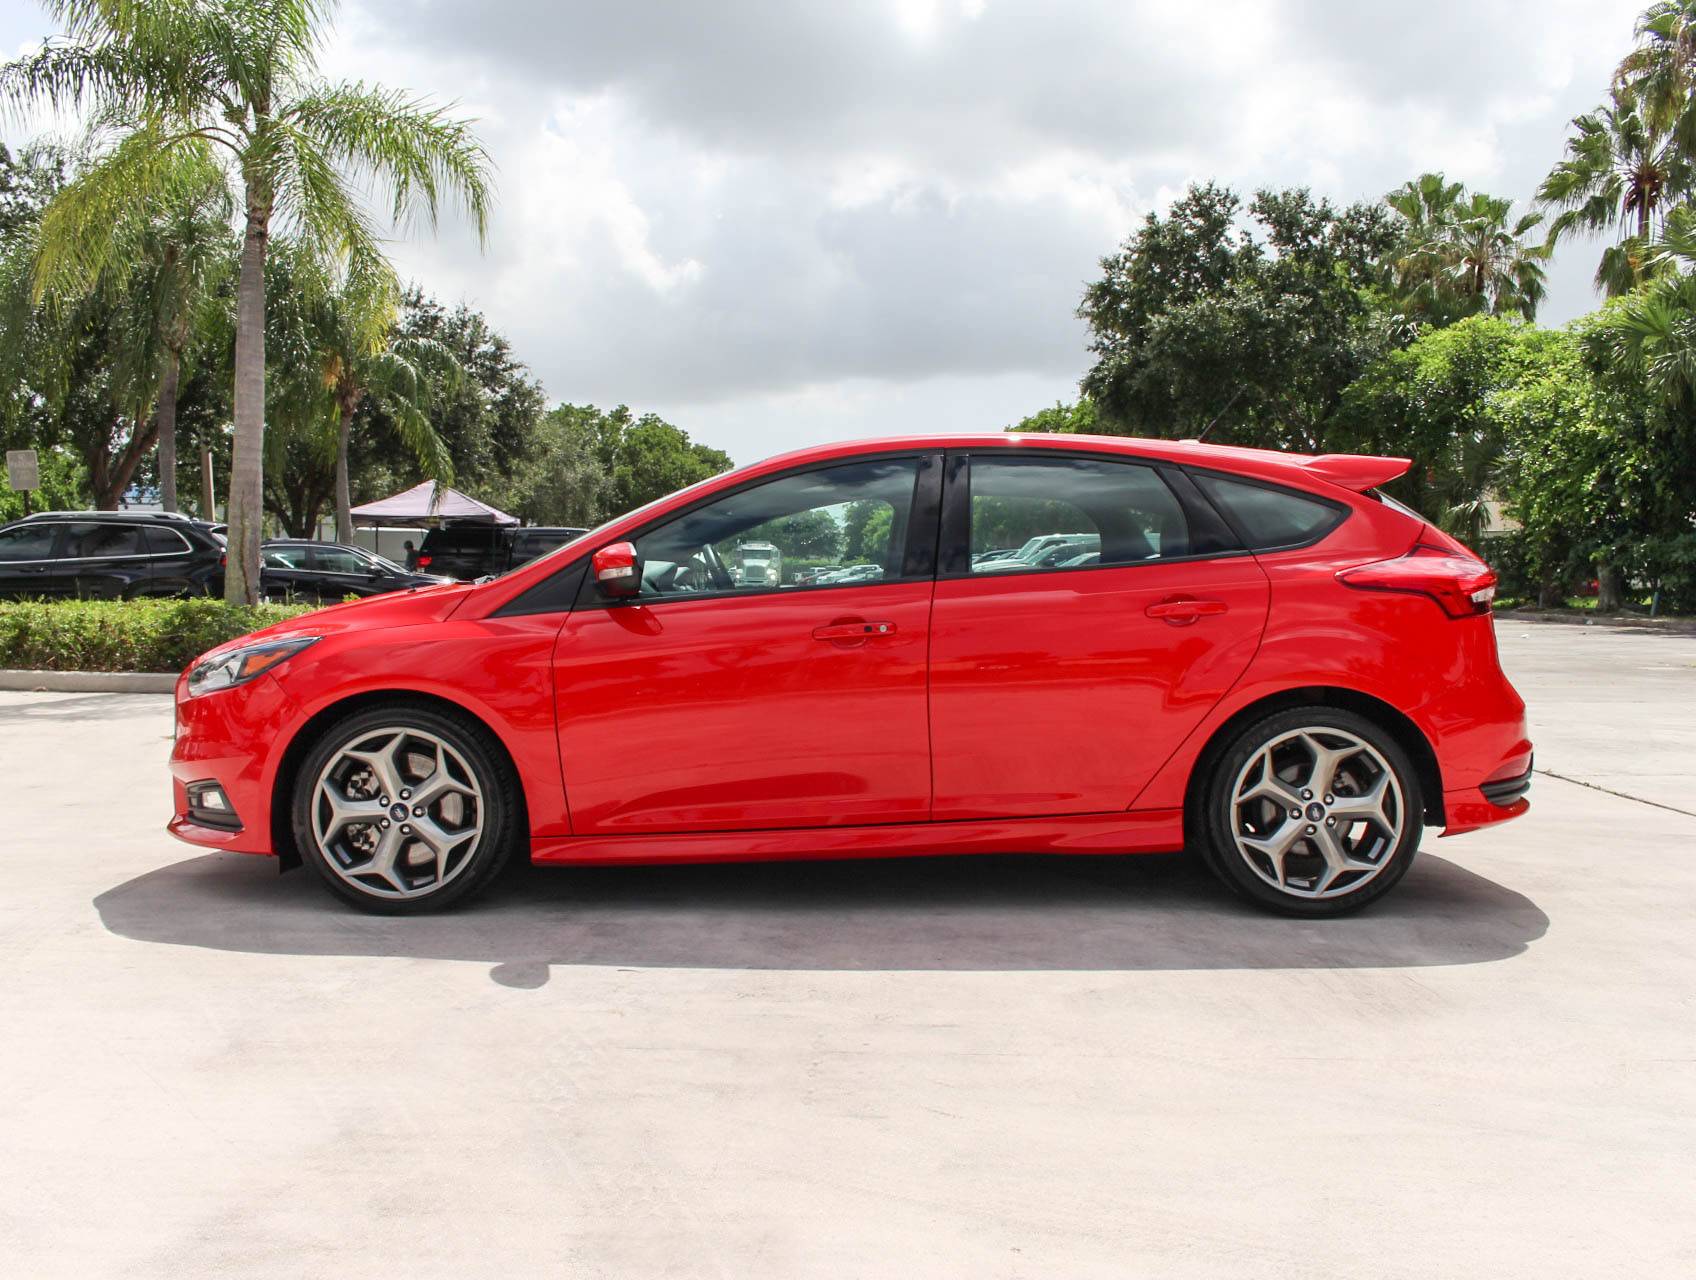 Florida Fine Cars - Used FORD FOCUS 2017 MARGATE ST